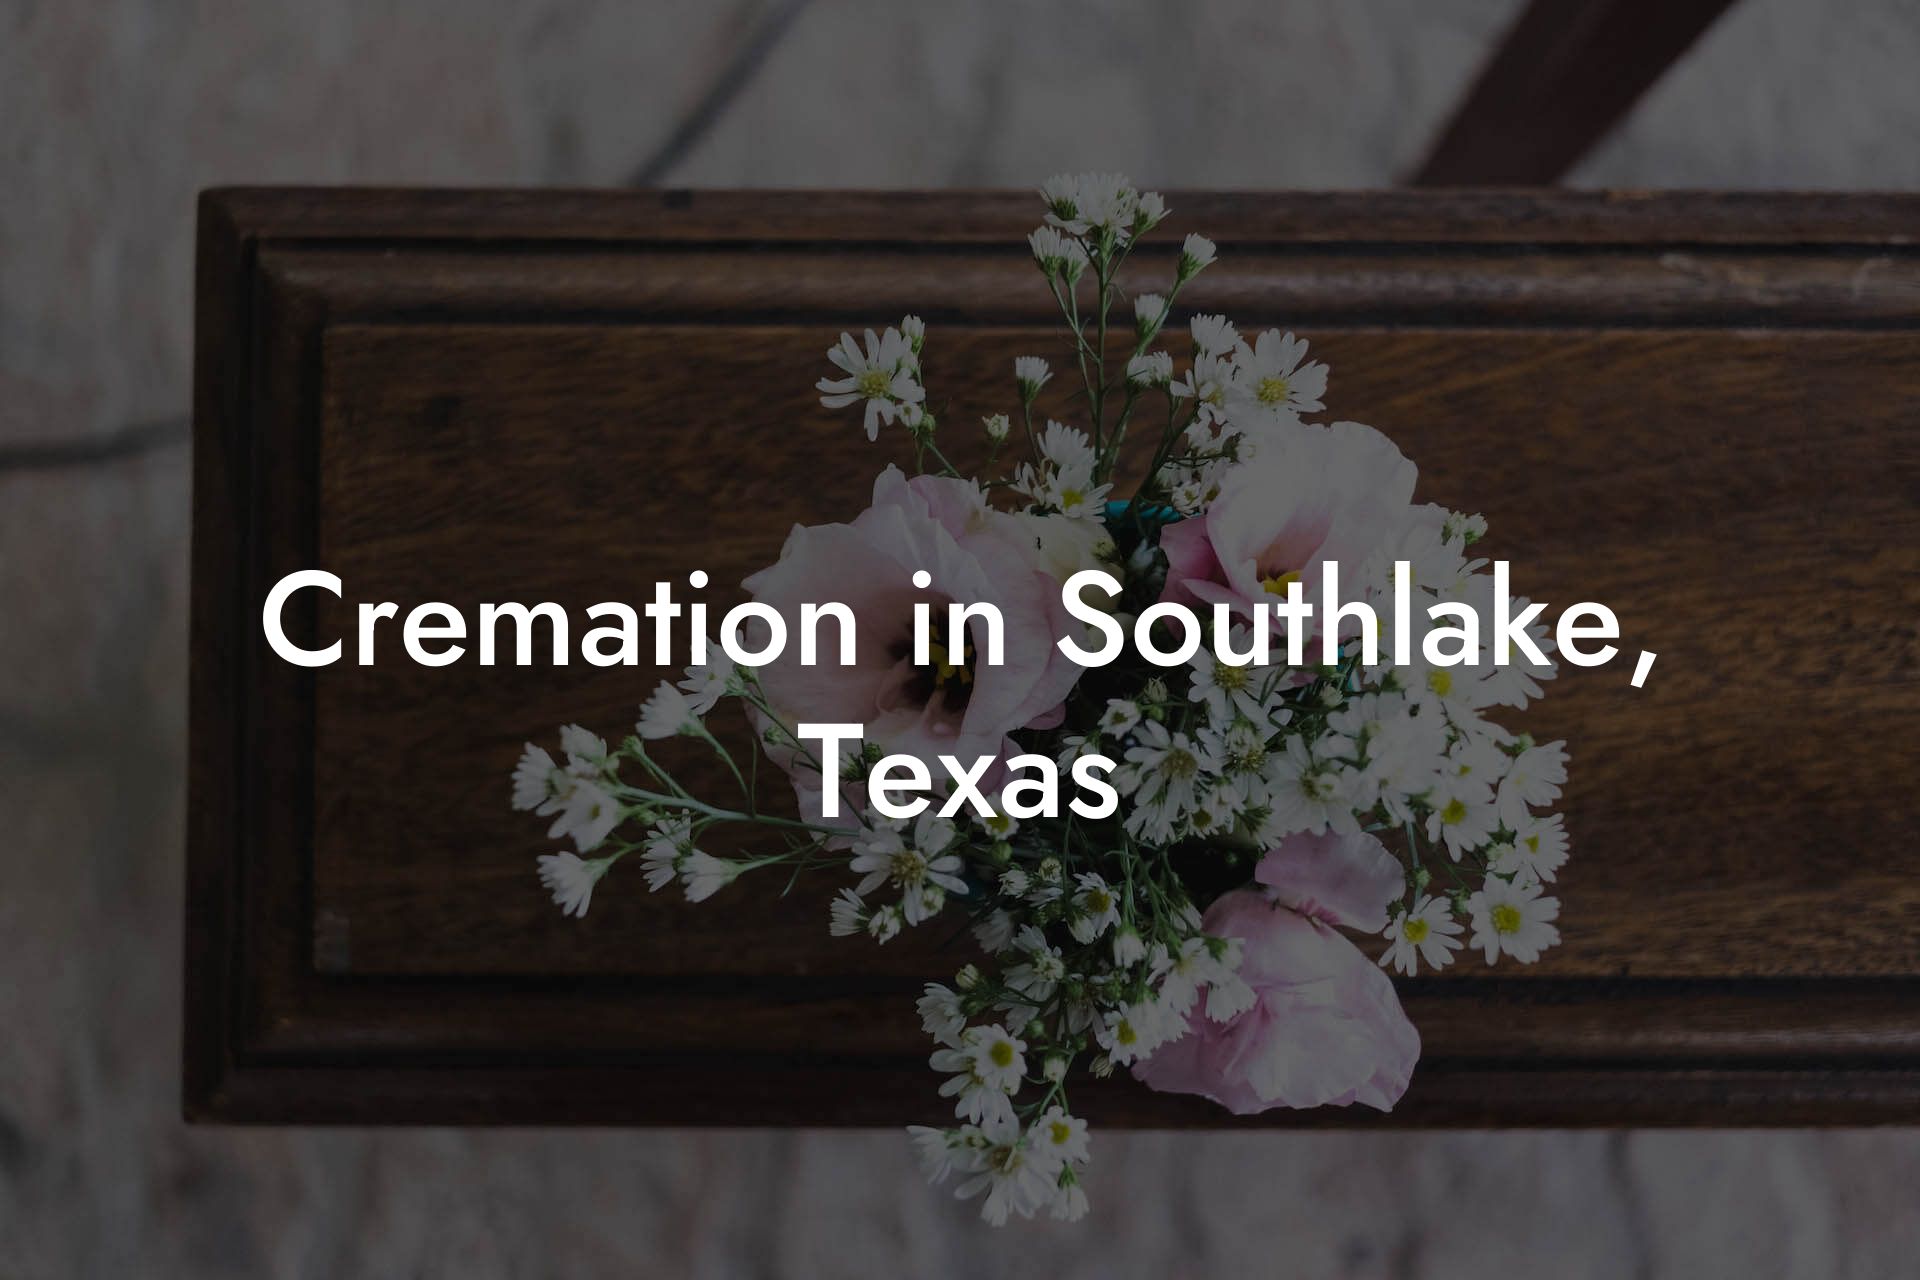 Cremation in Southlake, Texas